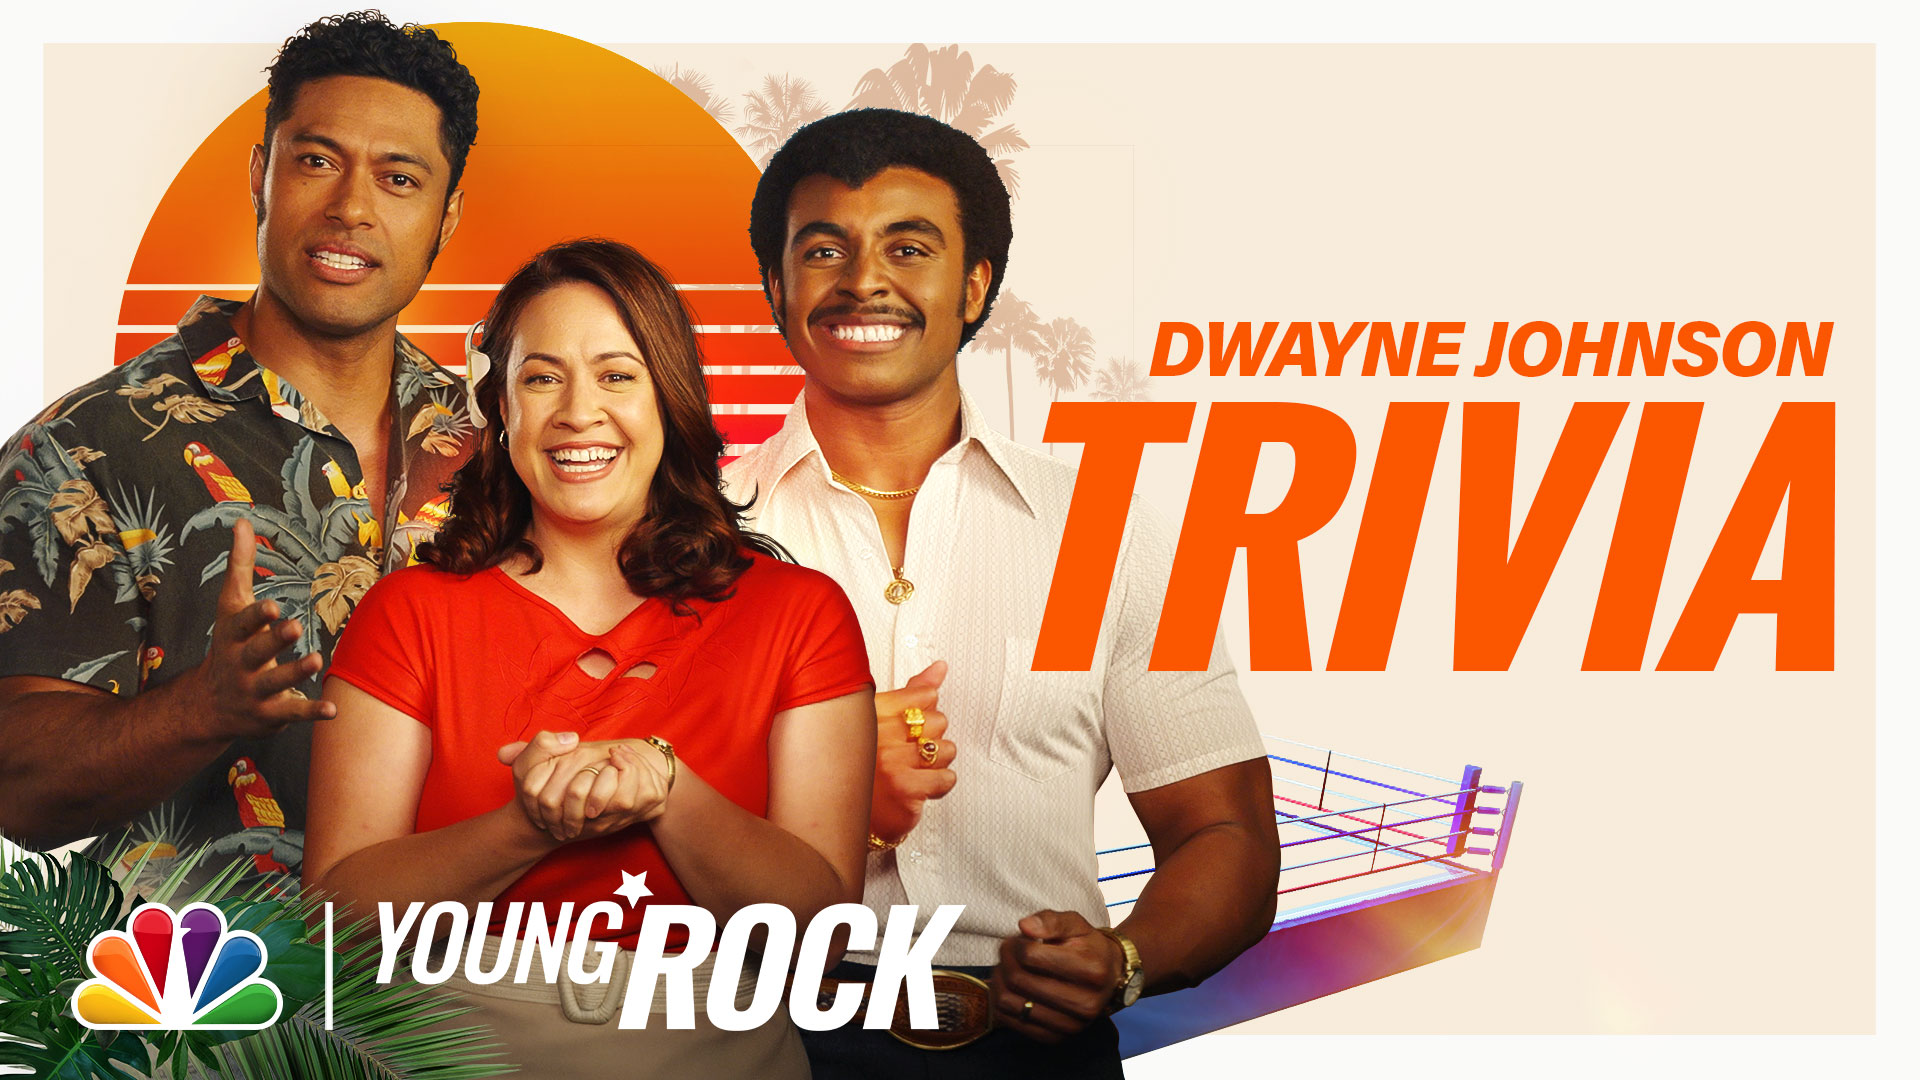 Meet the 'Young Rock' NBC cast, all playing Dwayne Johnson - Los Angeles  Times